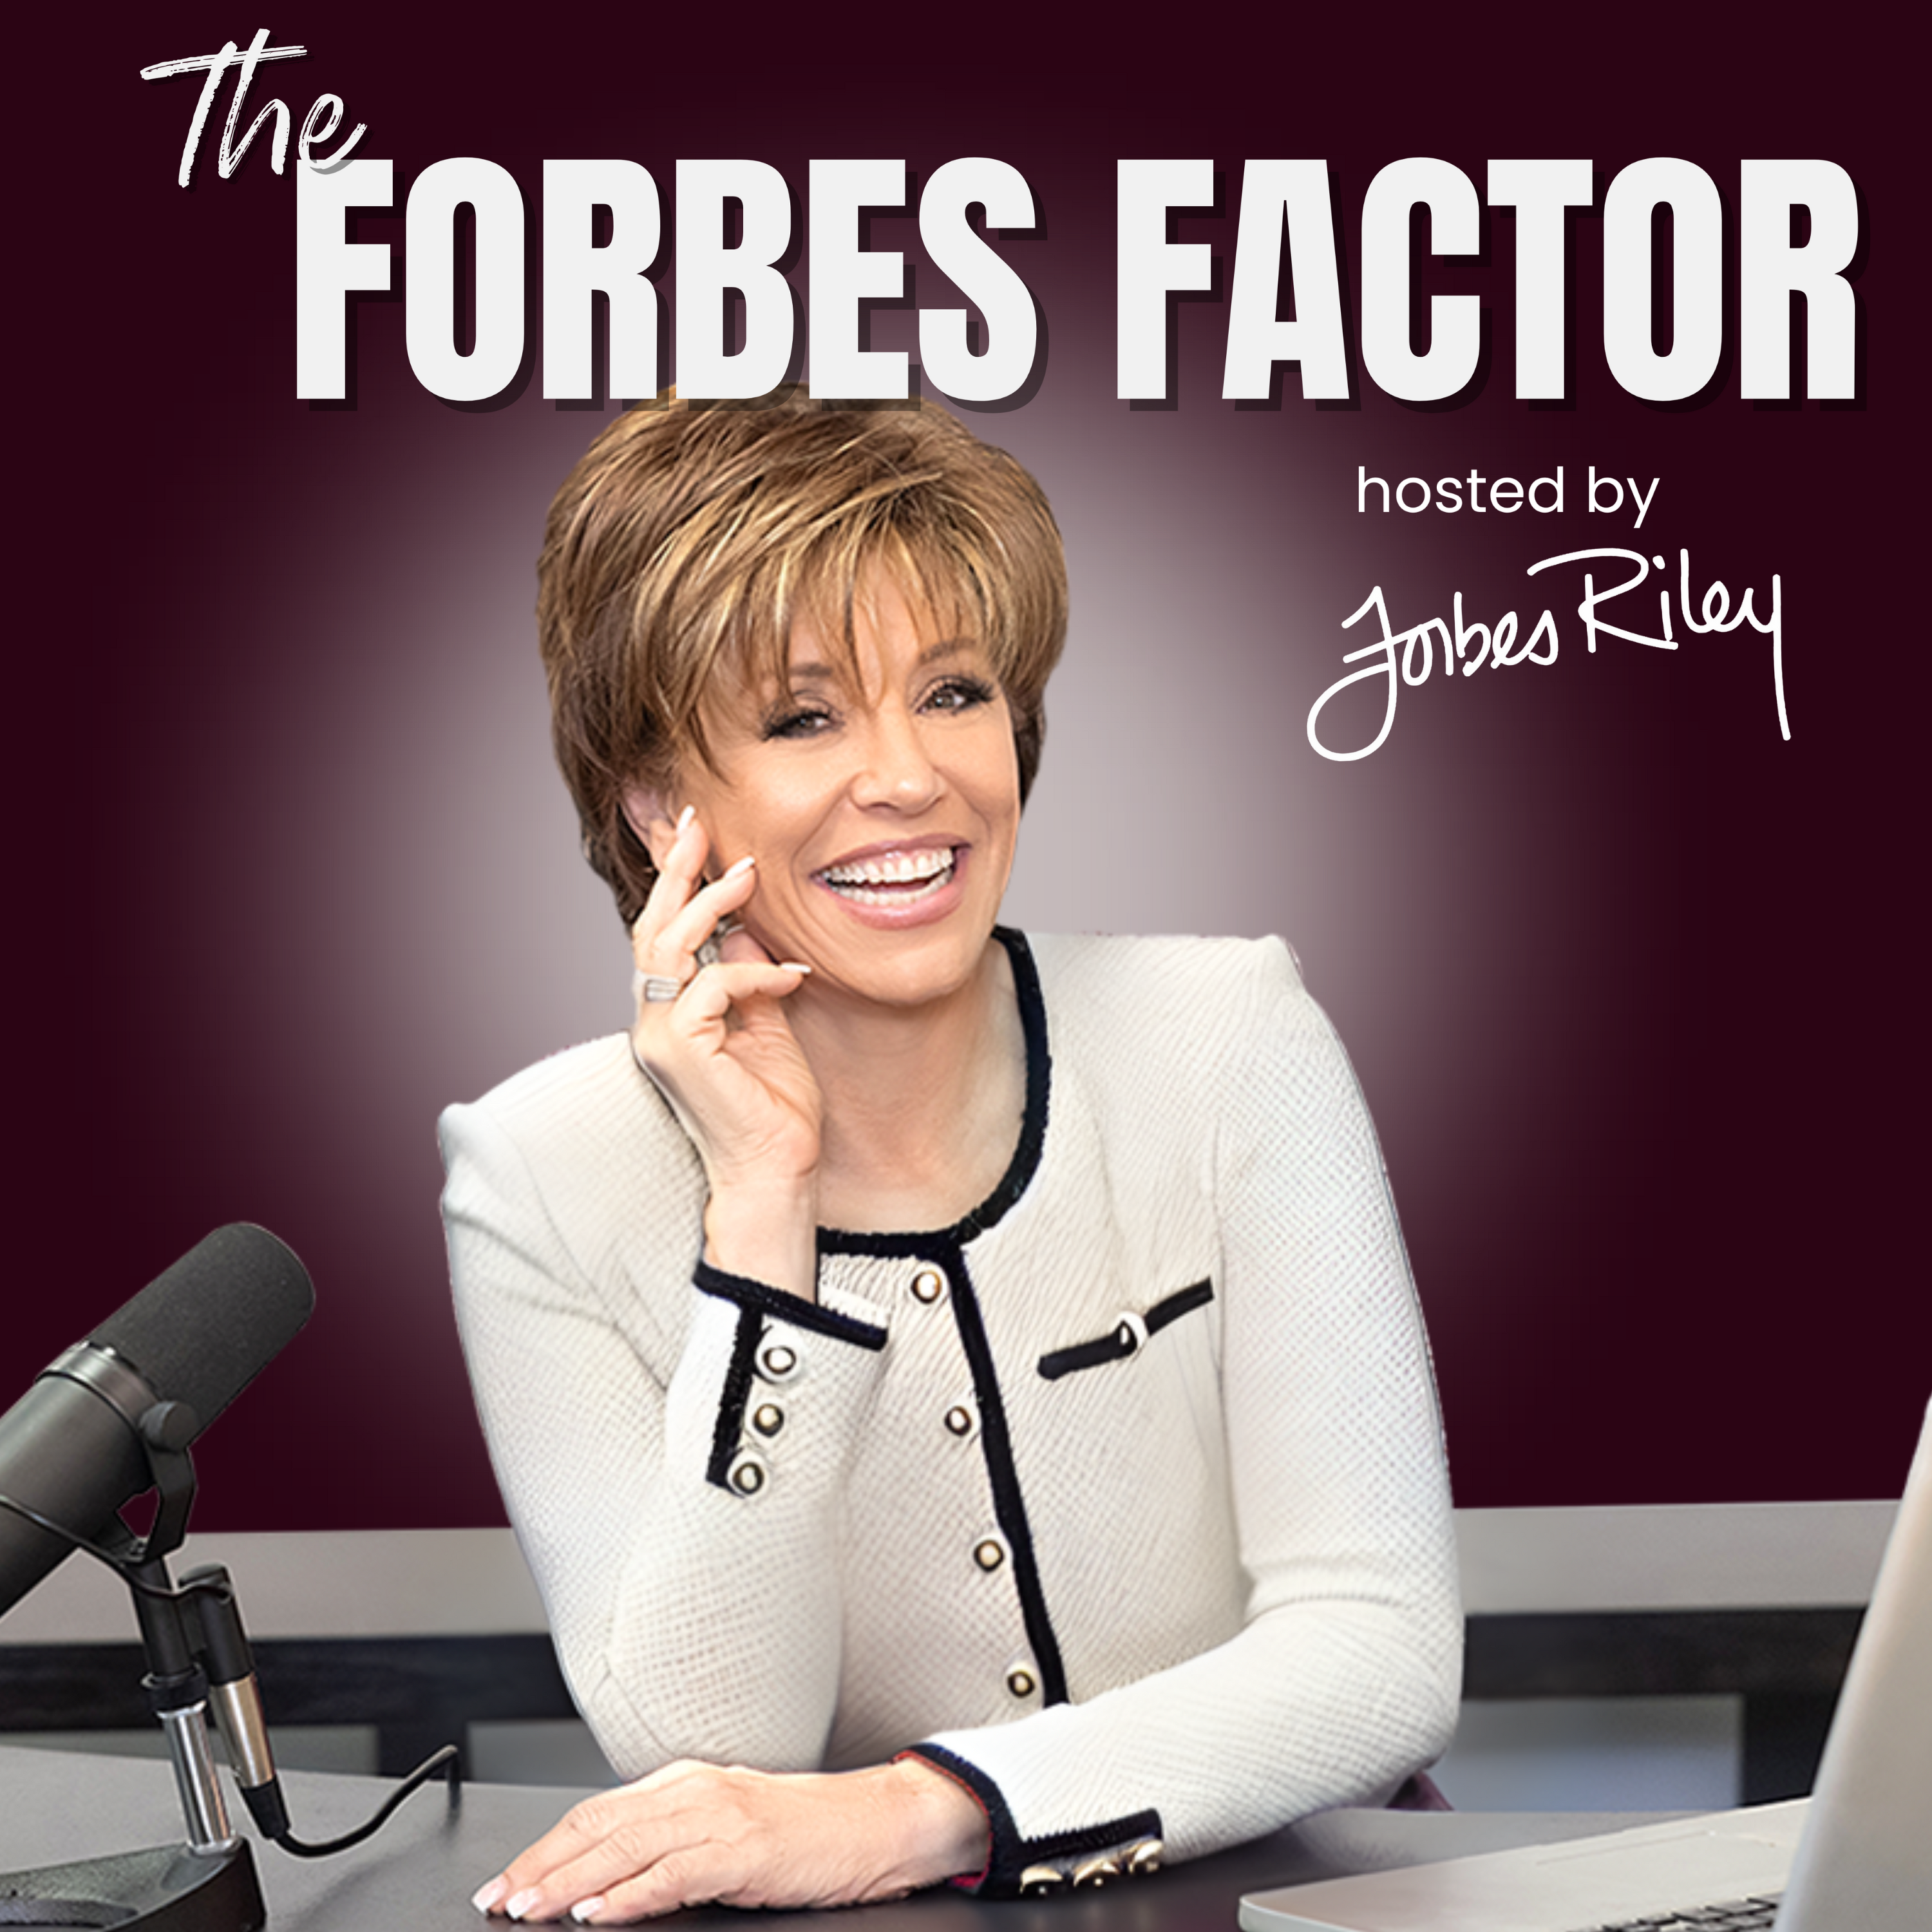 The Forbes Factor - Your Secret to health, wealth & happiness!